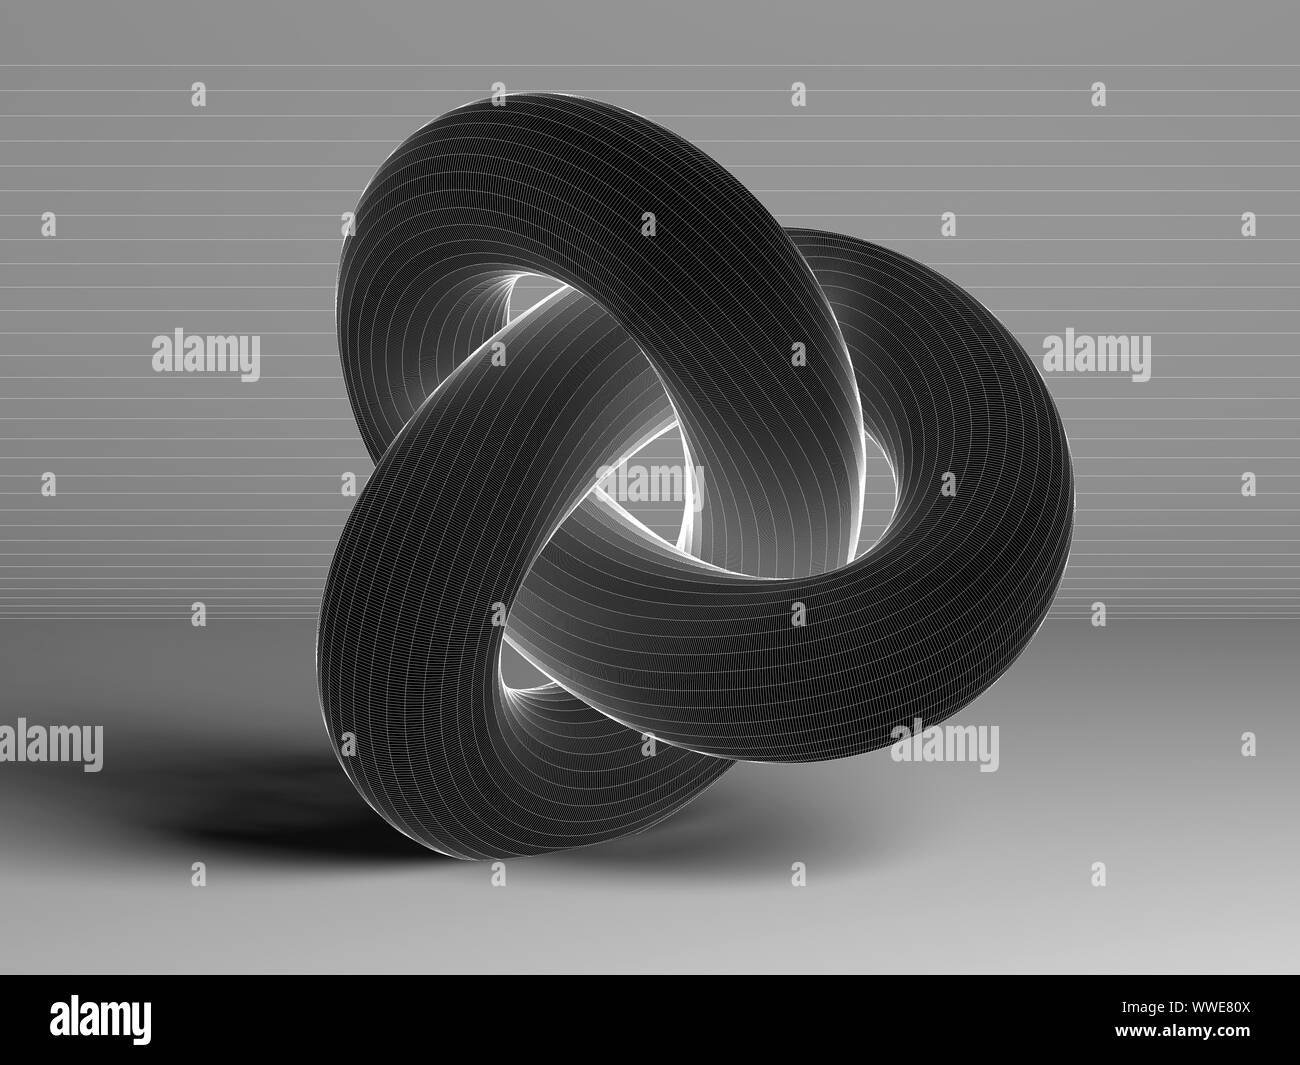 Black torus knot with white wire-frame lines, geometrical representation of parametric surface over gray background. 3d rendering illustration Stock Photo